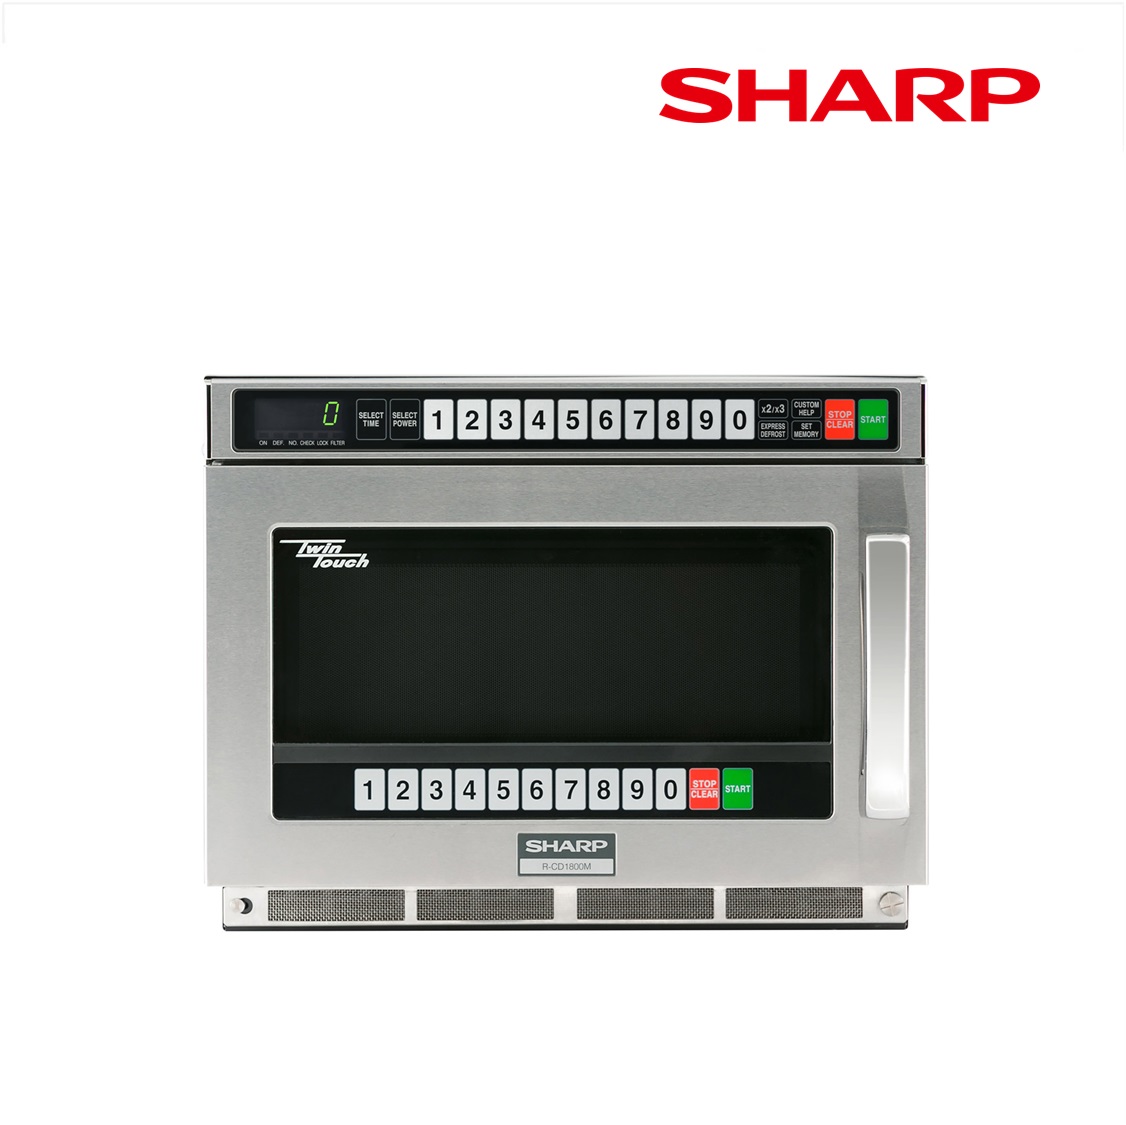 SHARP TwinTouch 1800 Watt Commercial Microwave Oven with Dual TouchPads RCD1800M